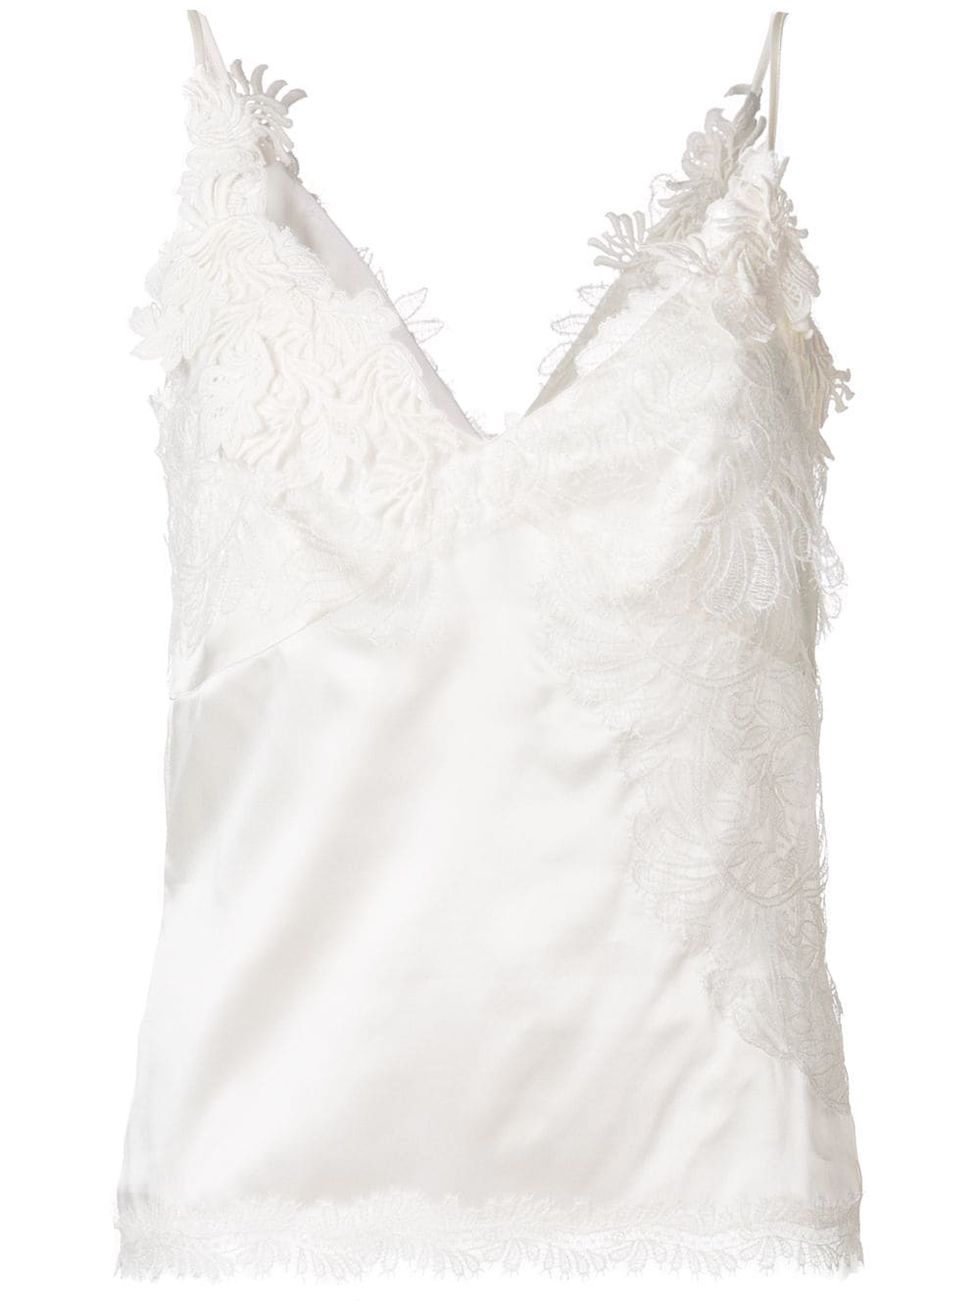 White, Clothing, camisoles, Sleeveless shirt, Dress, Outerwear, Neck, Undergarment, Lingerie top, Blouse, 